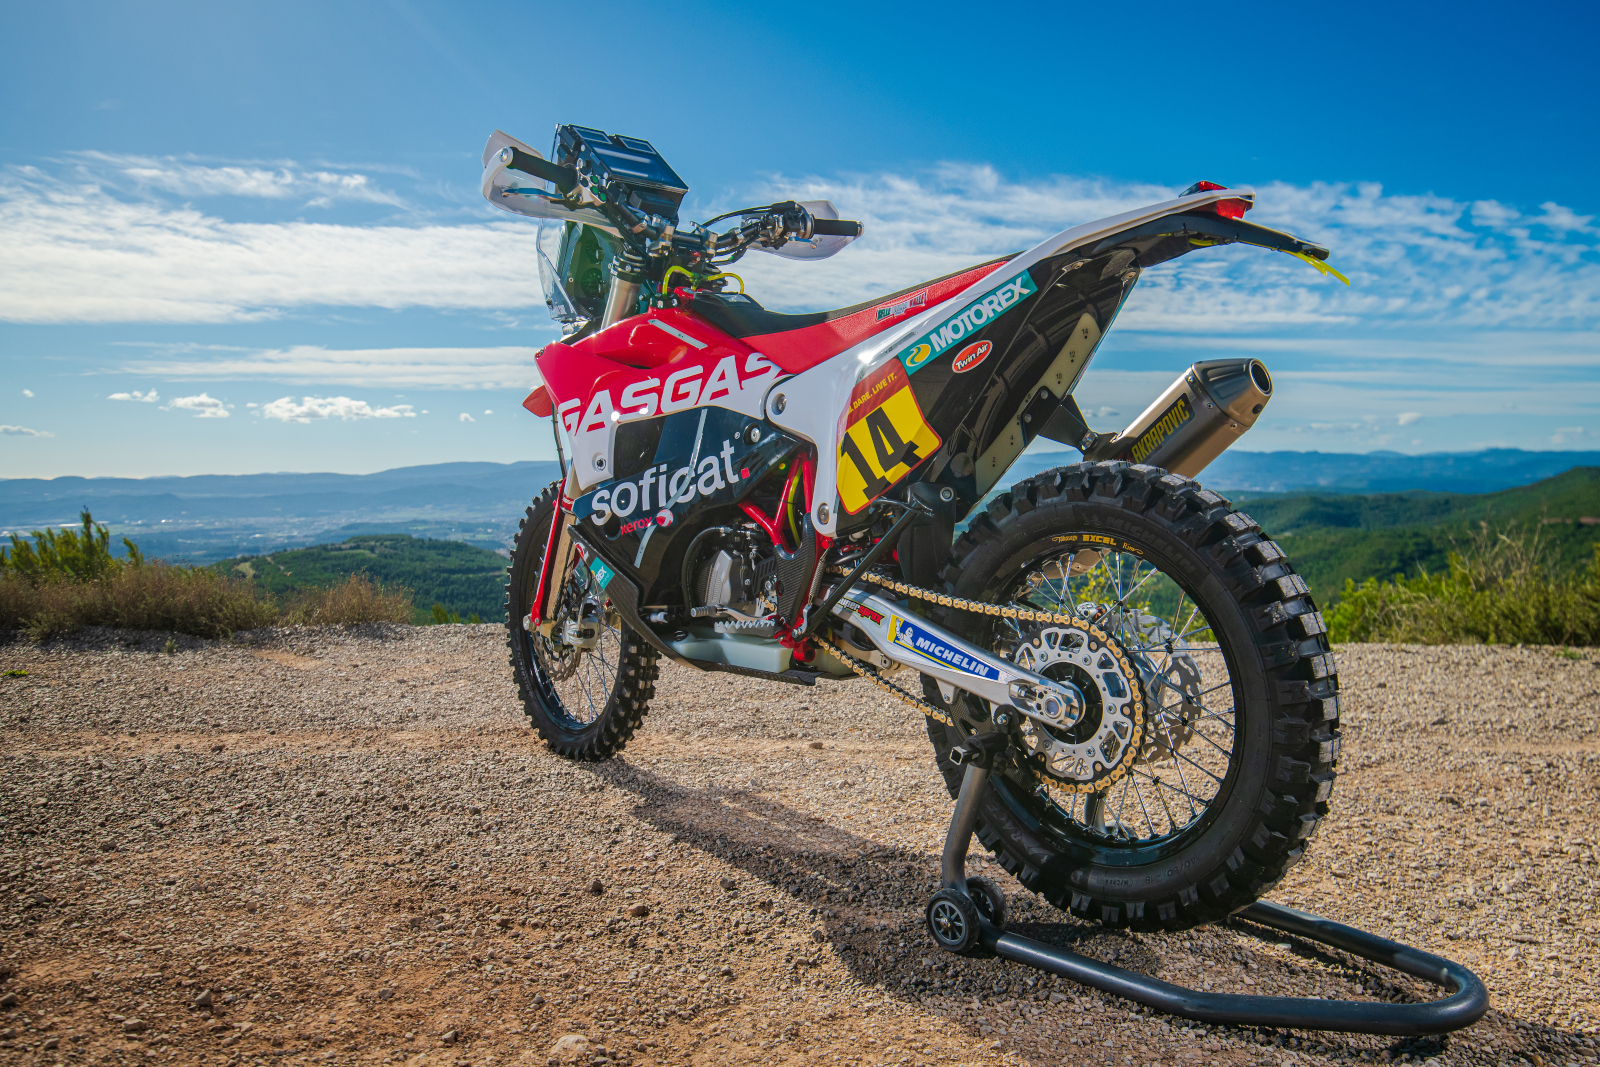 GasGas Motorcycles team up with Motorex 